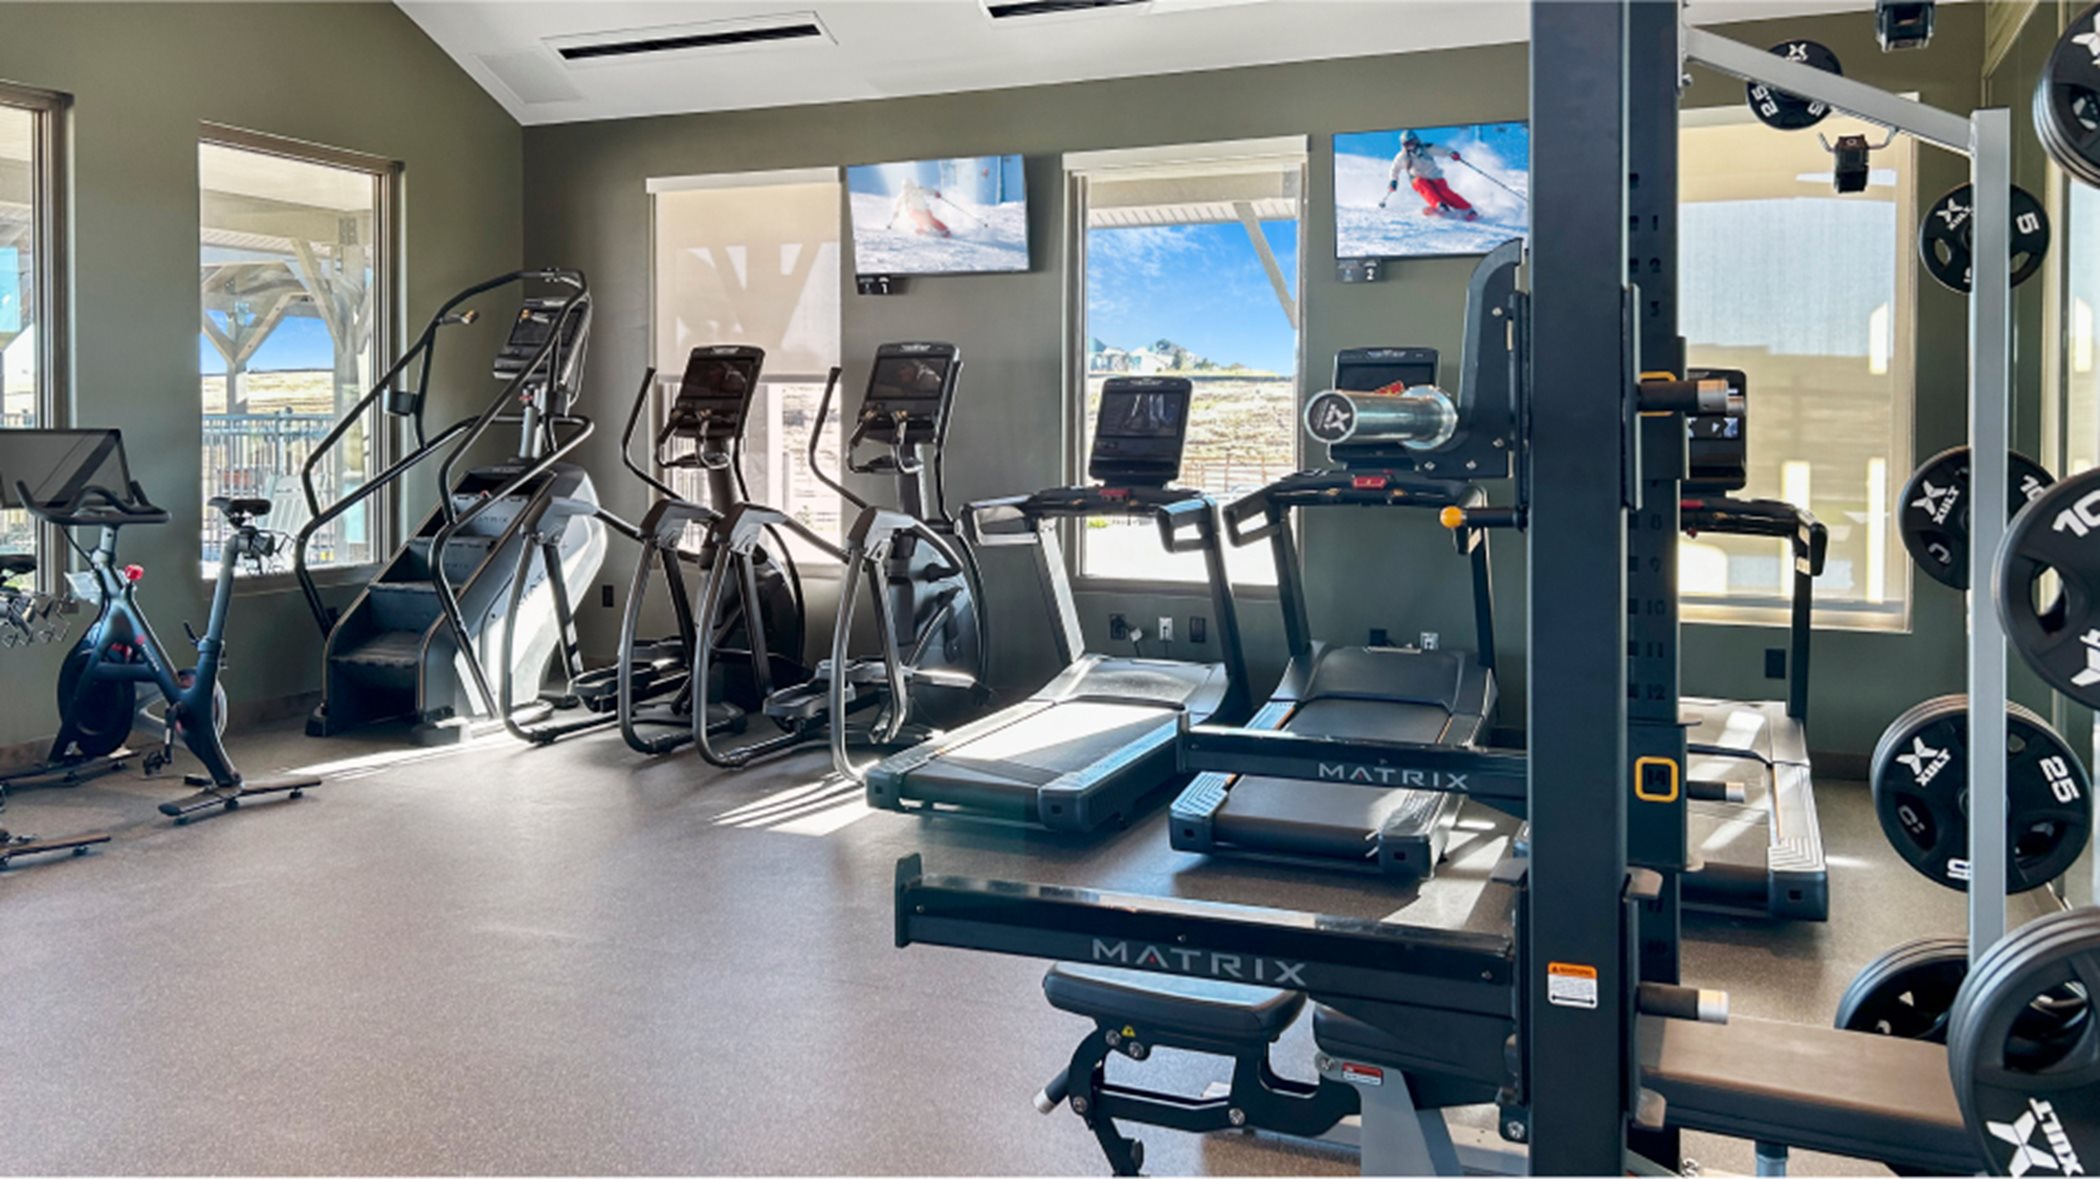 Fitness center with treadmills and other cardio machines